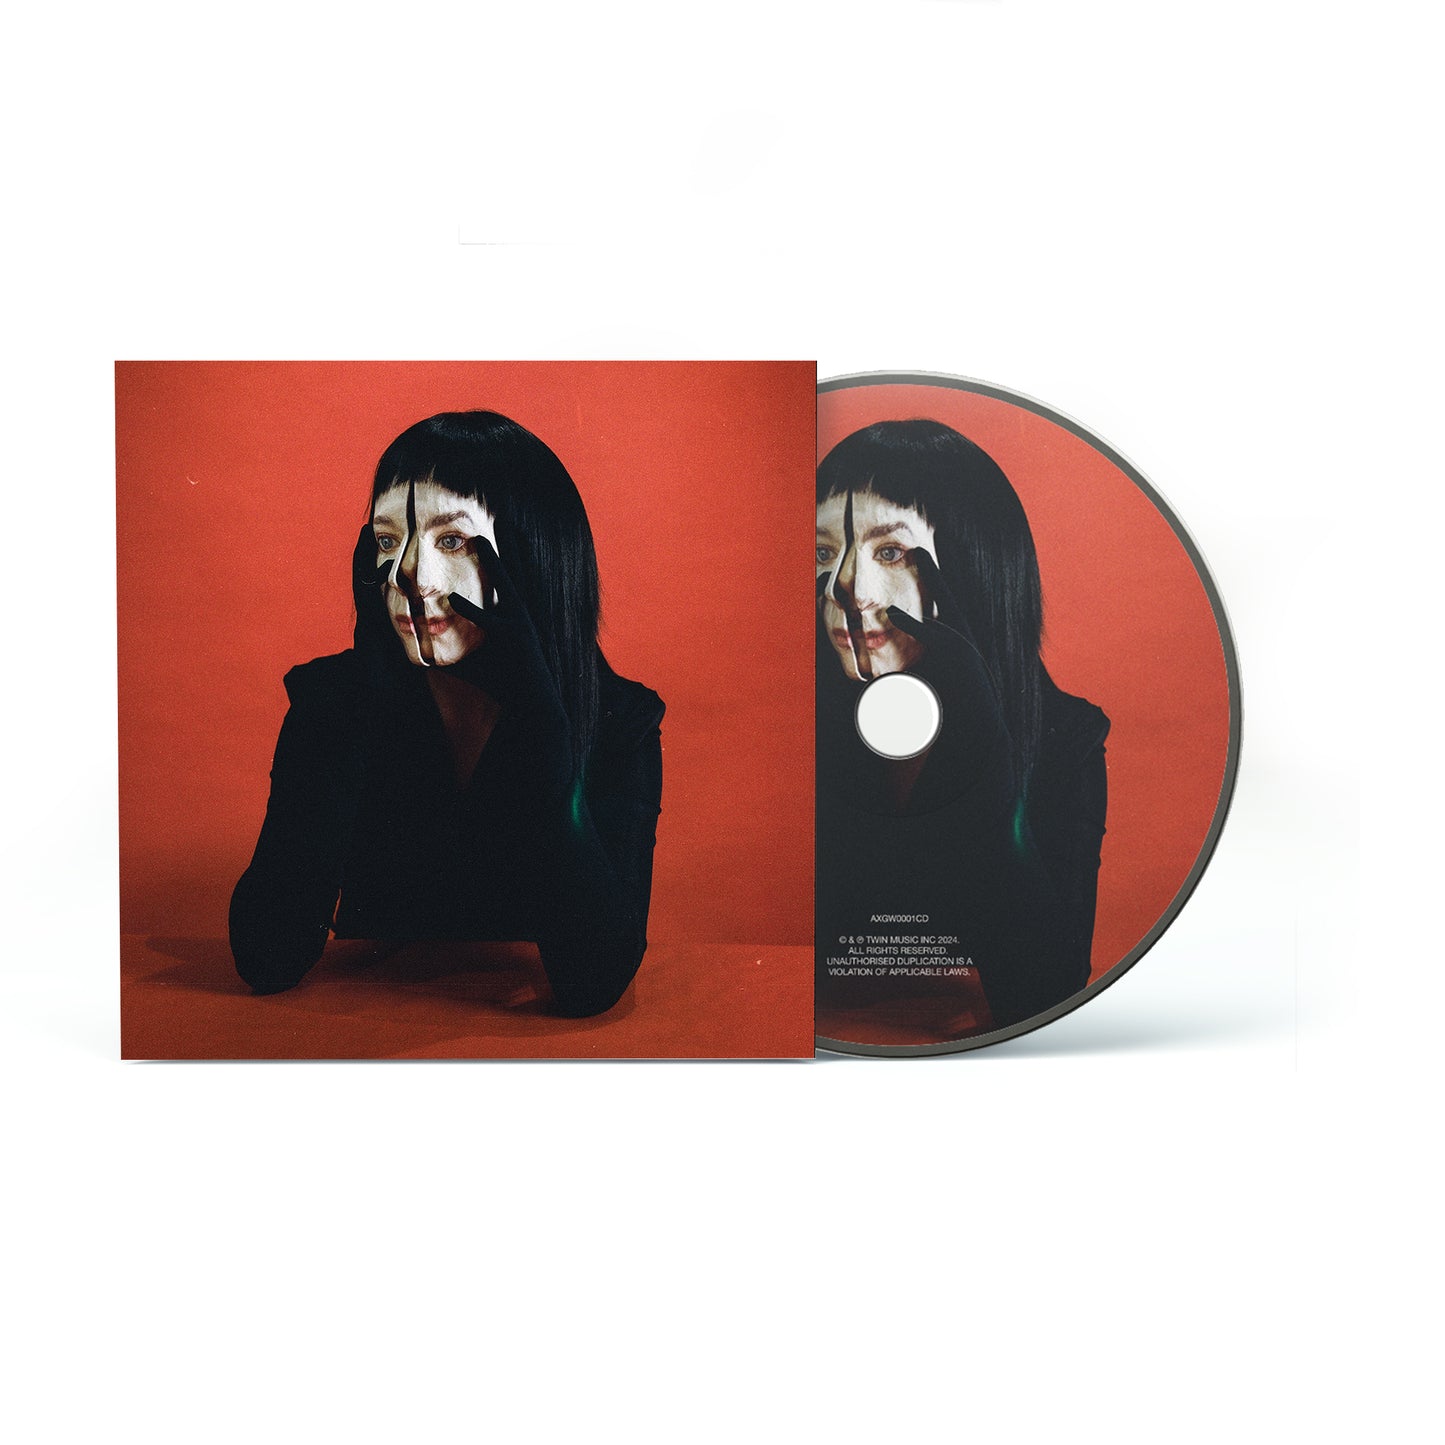 GIRL WITH NO FACE - CD